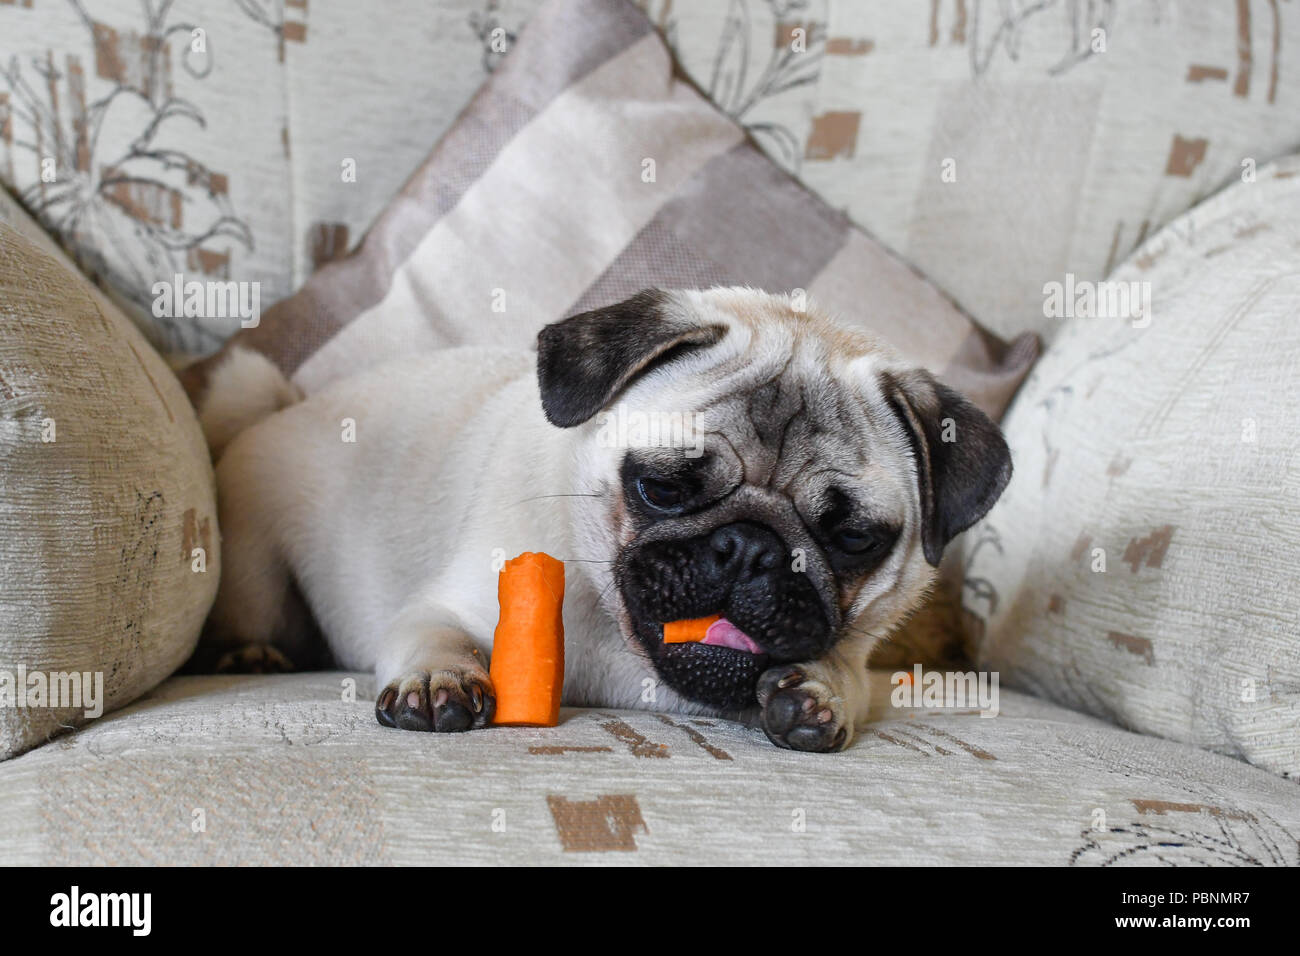 Cute Pug dog sitting on a chair  eating a carrot ( diet ) Stock Photo